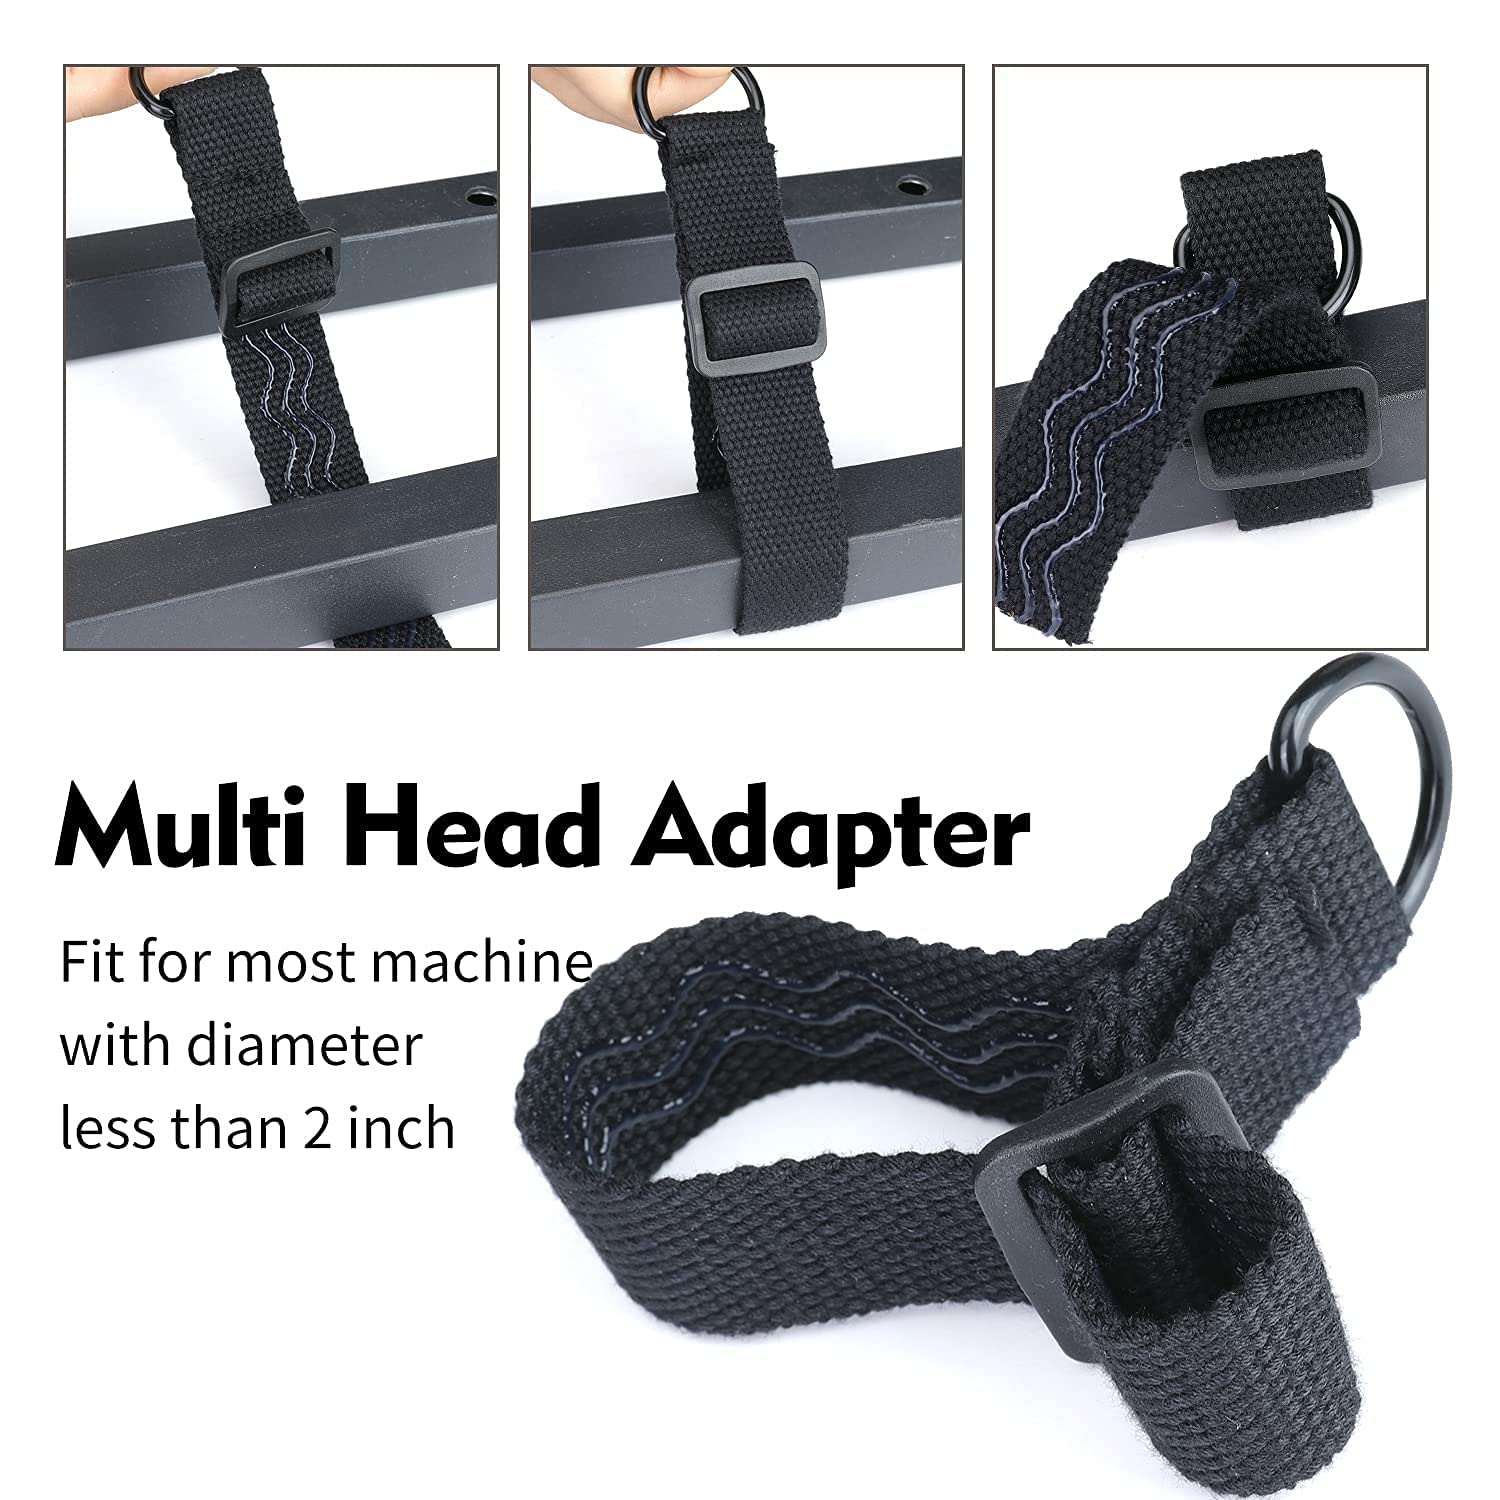 frtzal Shoulder Strap Trimmer Strap Blower Straps Strap Universal for Weedeater Leaf Blower, Multi Head System, Weed Eaters Clearance,